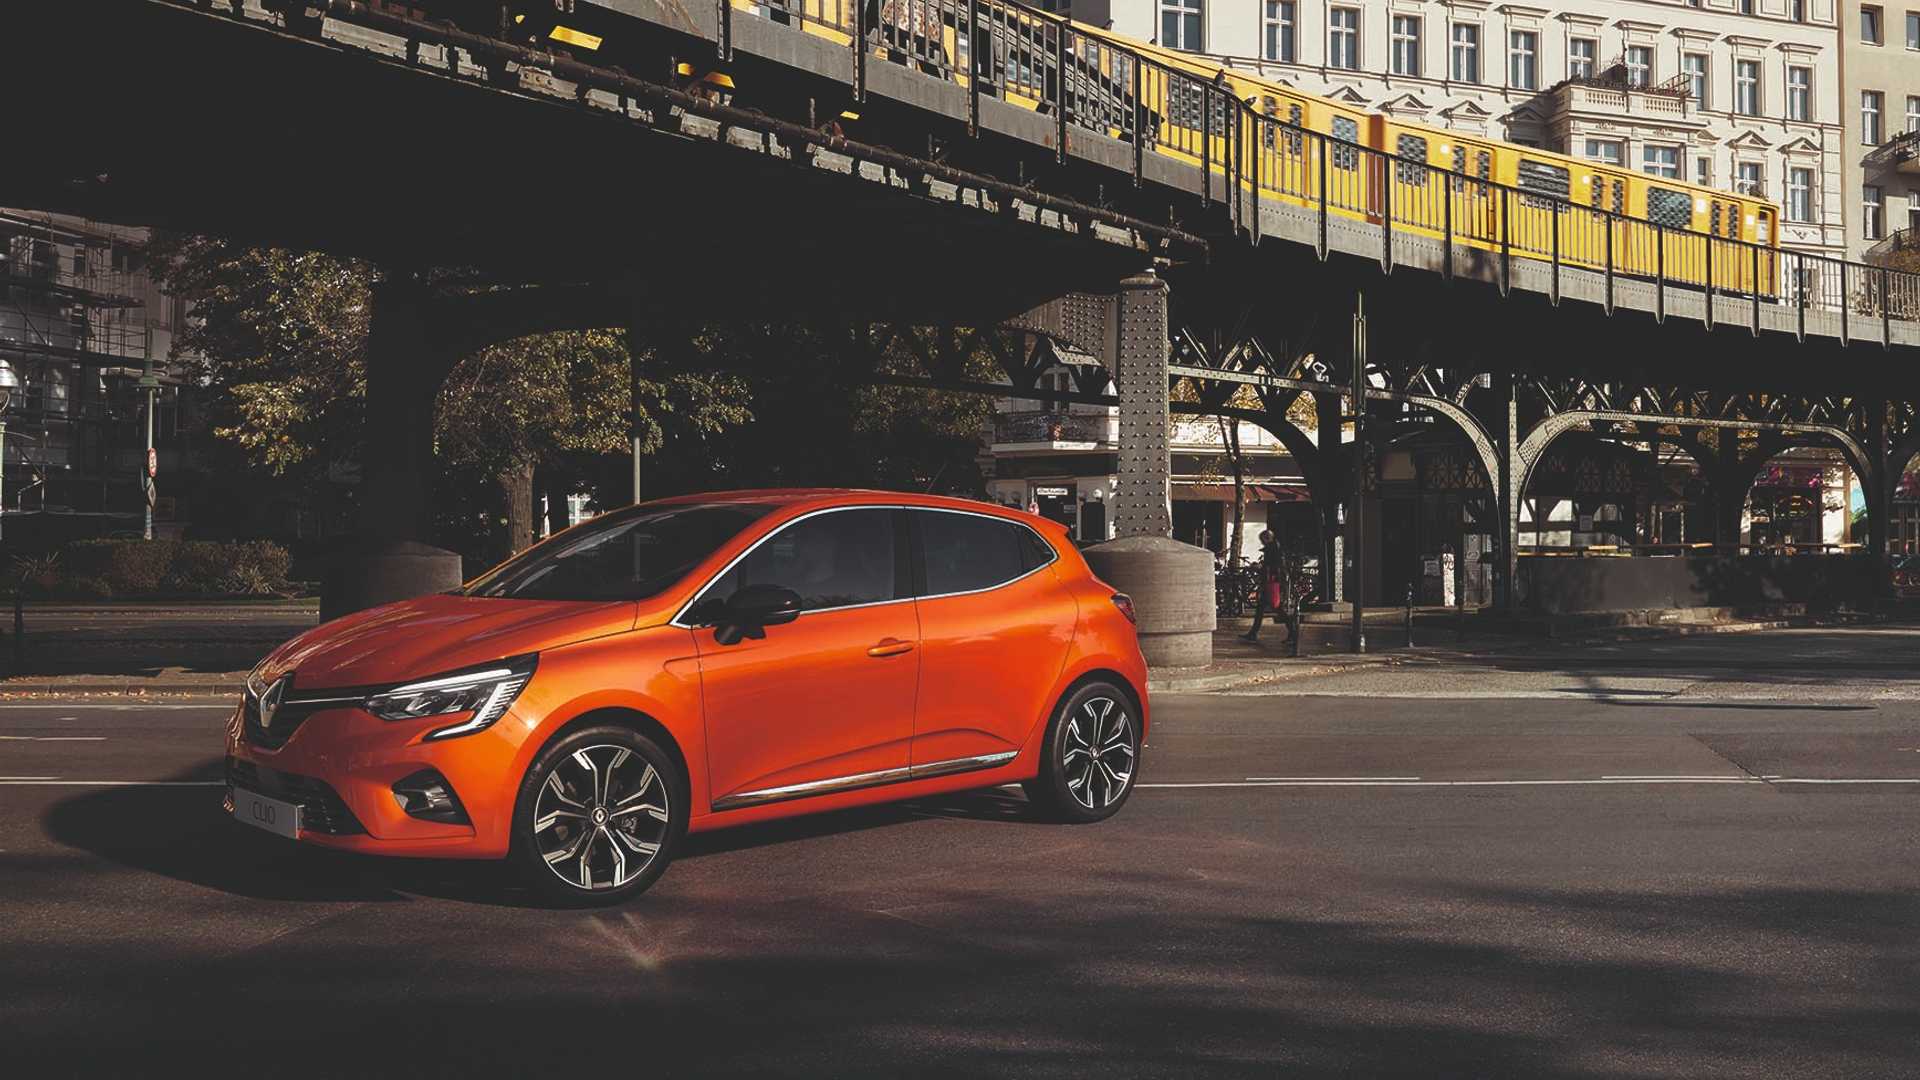 New Renault Clio: the standard-setting versatile city car ushers in a new  style - Site media global de Renault